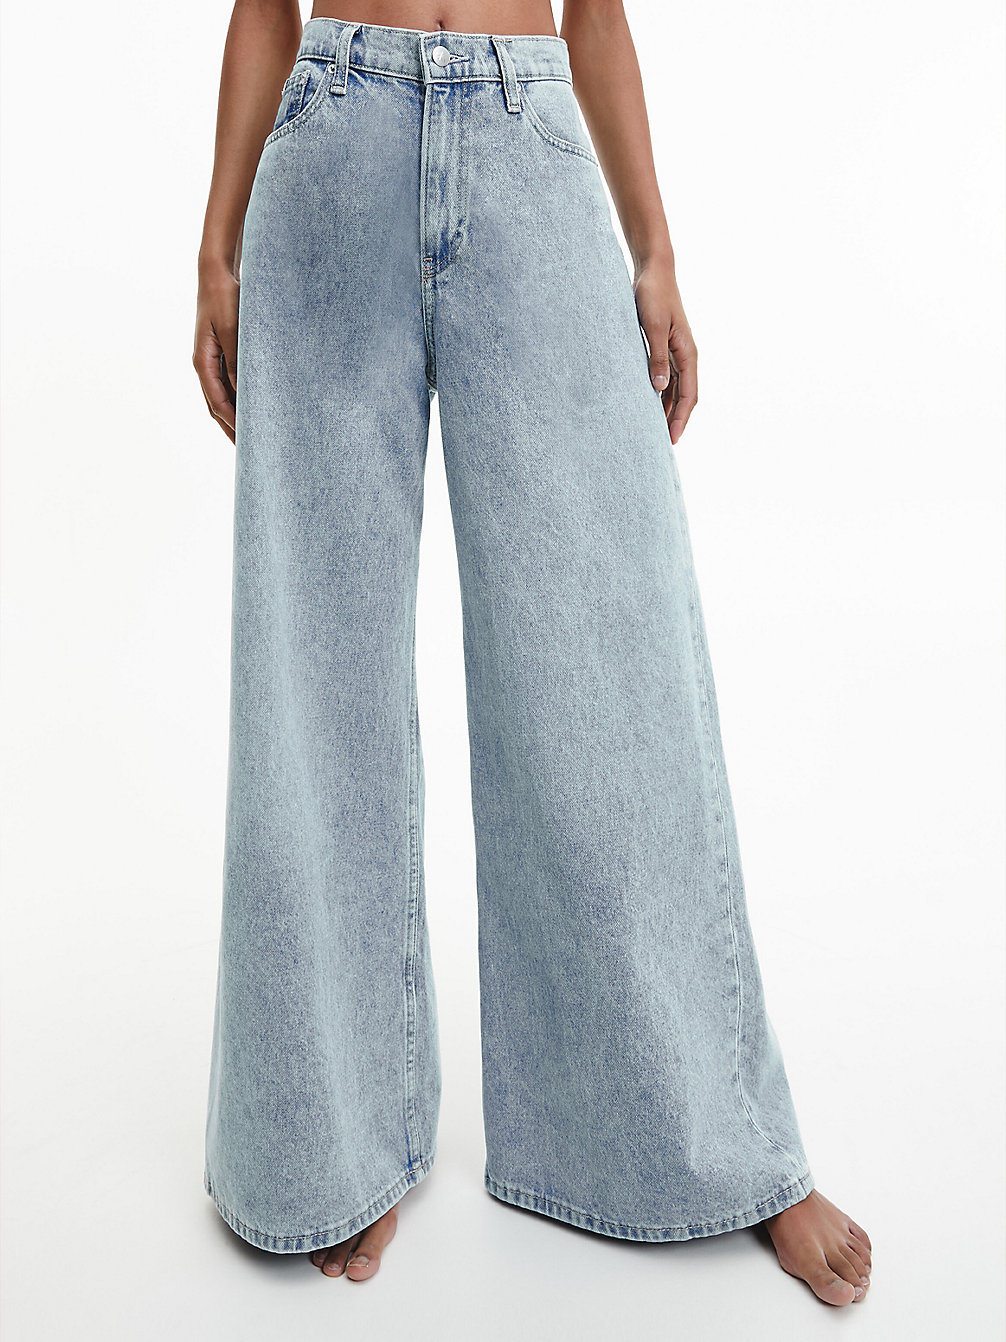 Low Rise Loose Jeans > DENIM LIGHT > undefined mujer > Calvin Klein